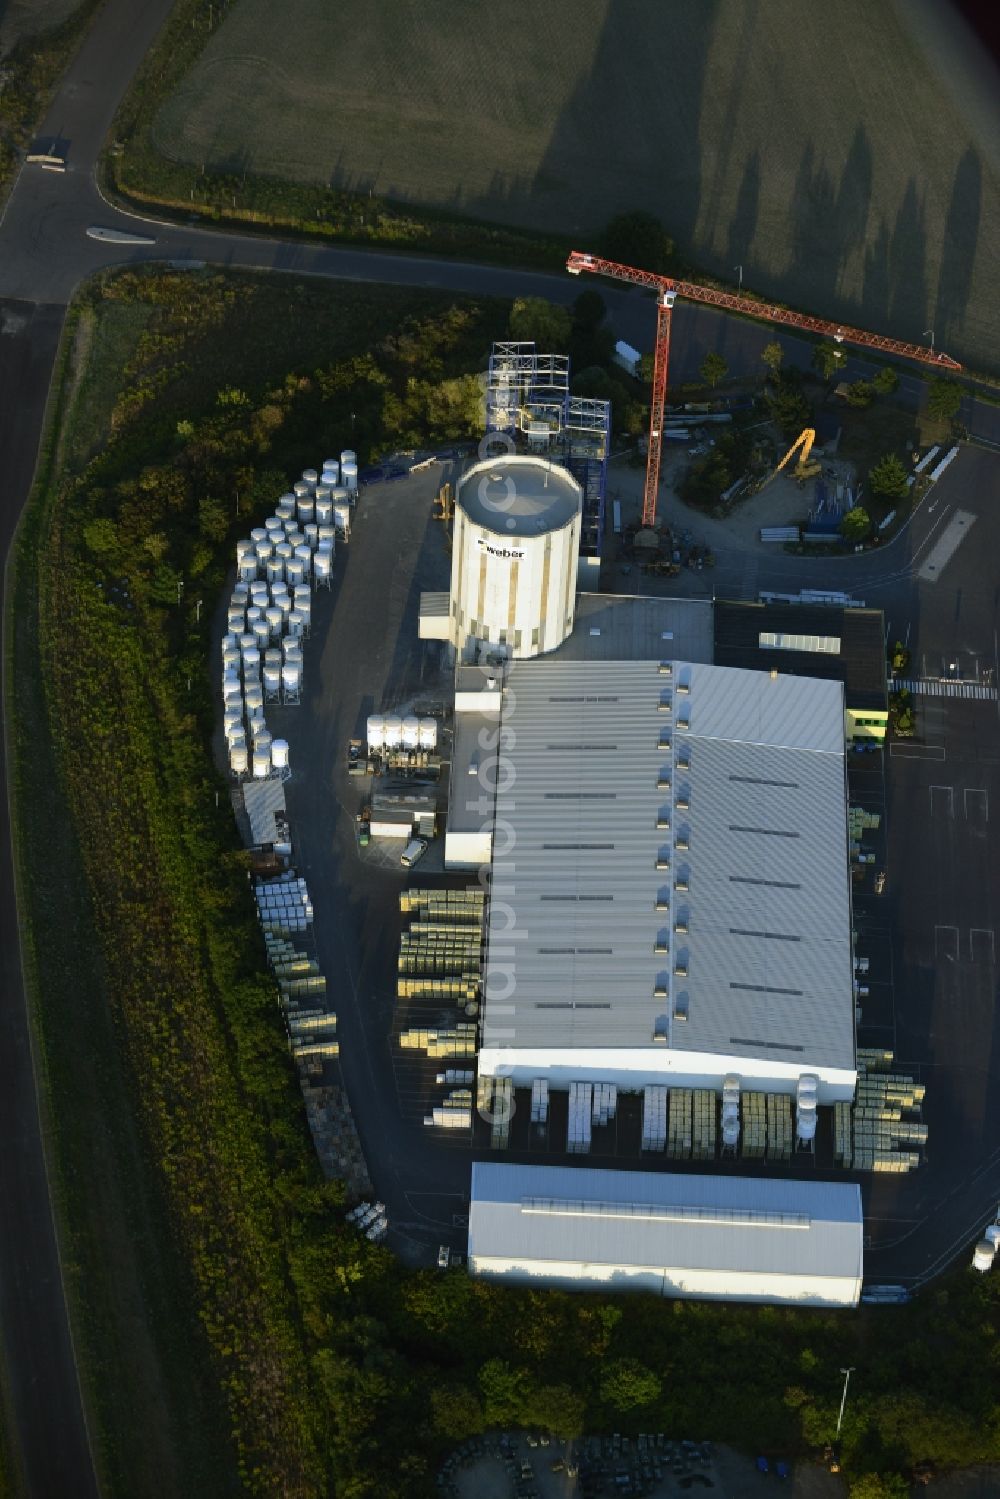 Aerial image Rüdersdorf bei Berlin - Building and production halls on the premises of Saint-Gobain Weber GmbH in Ruedersdorf bei Berlin in the state of Brandenburg. The compound with the white silo and production facilities is located in the East of the Herzfelde part